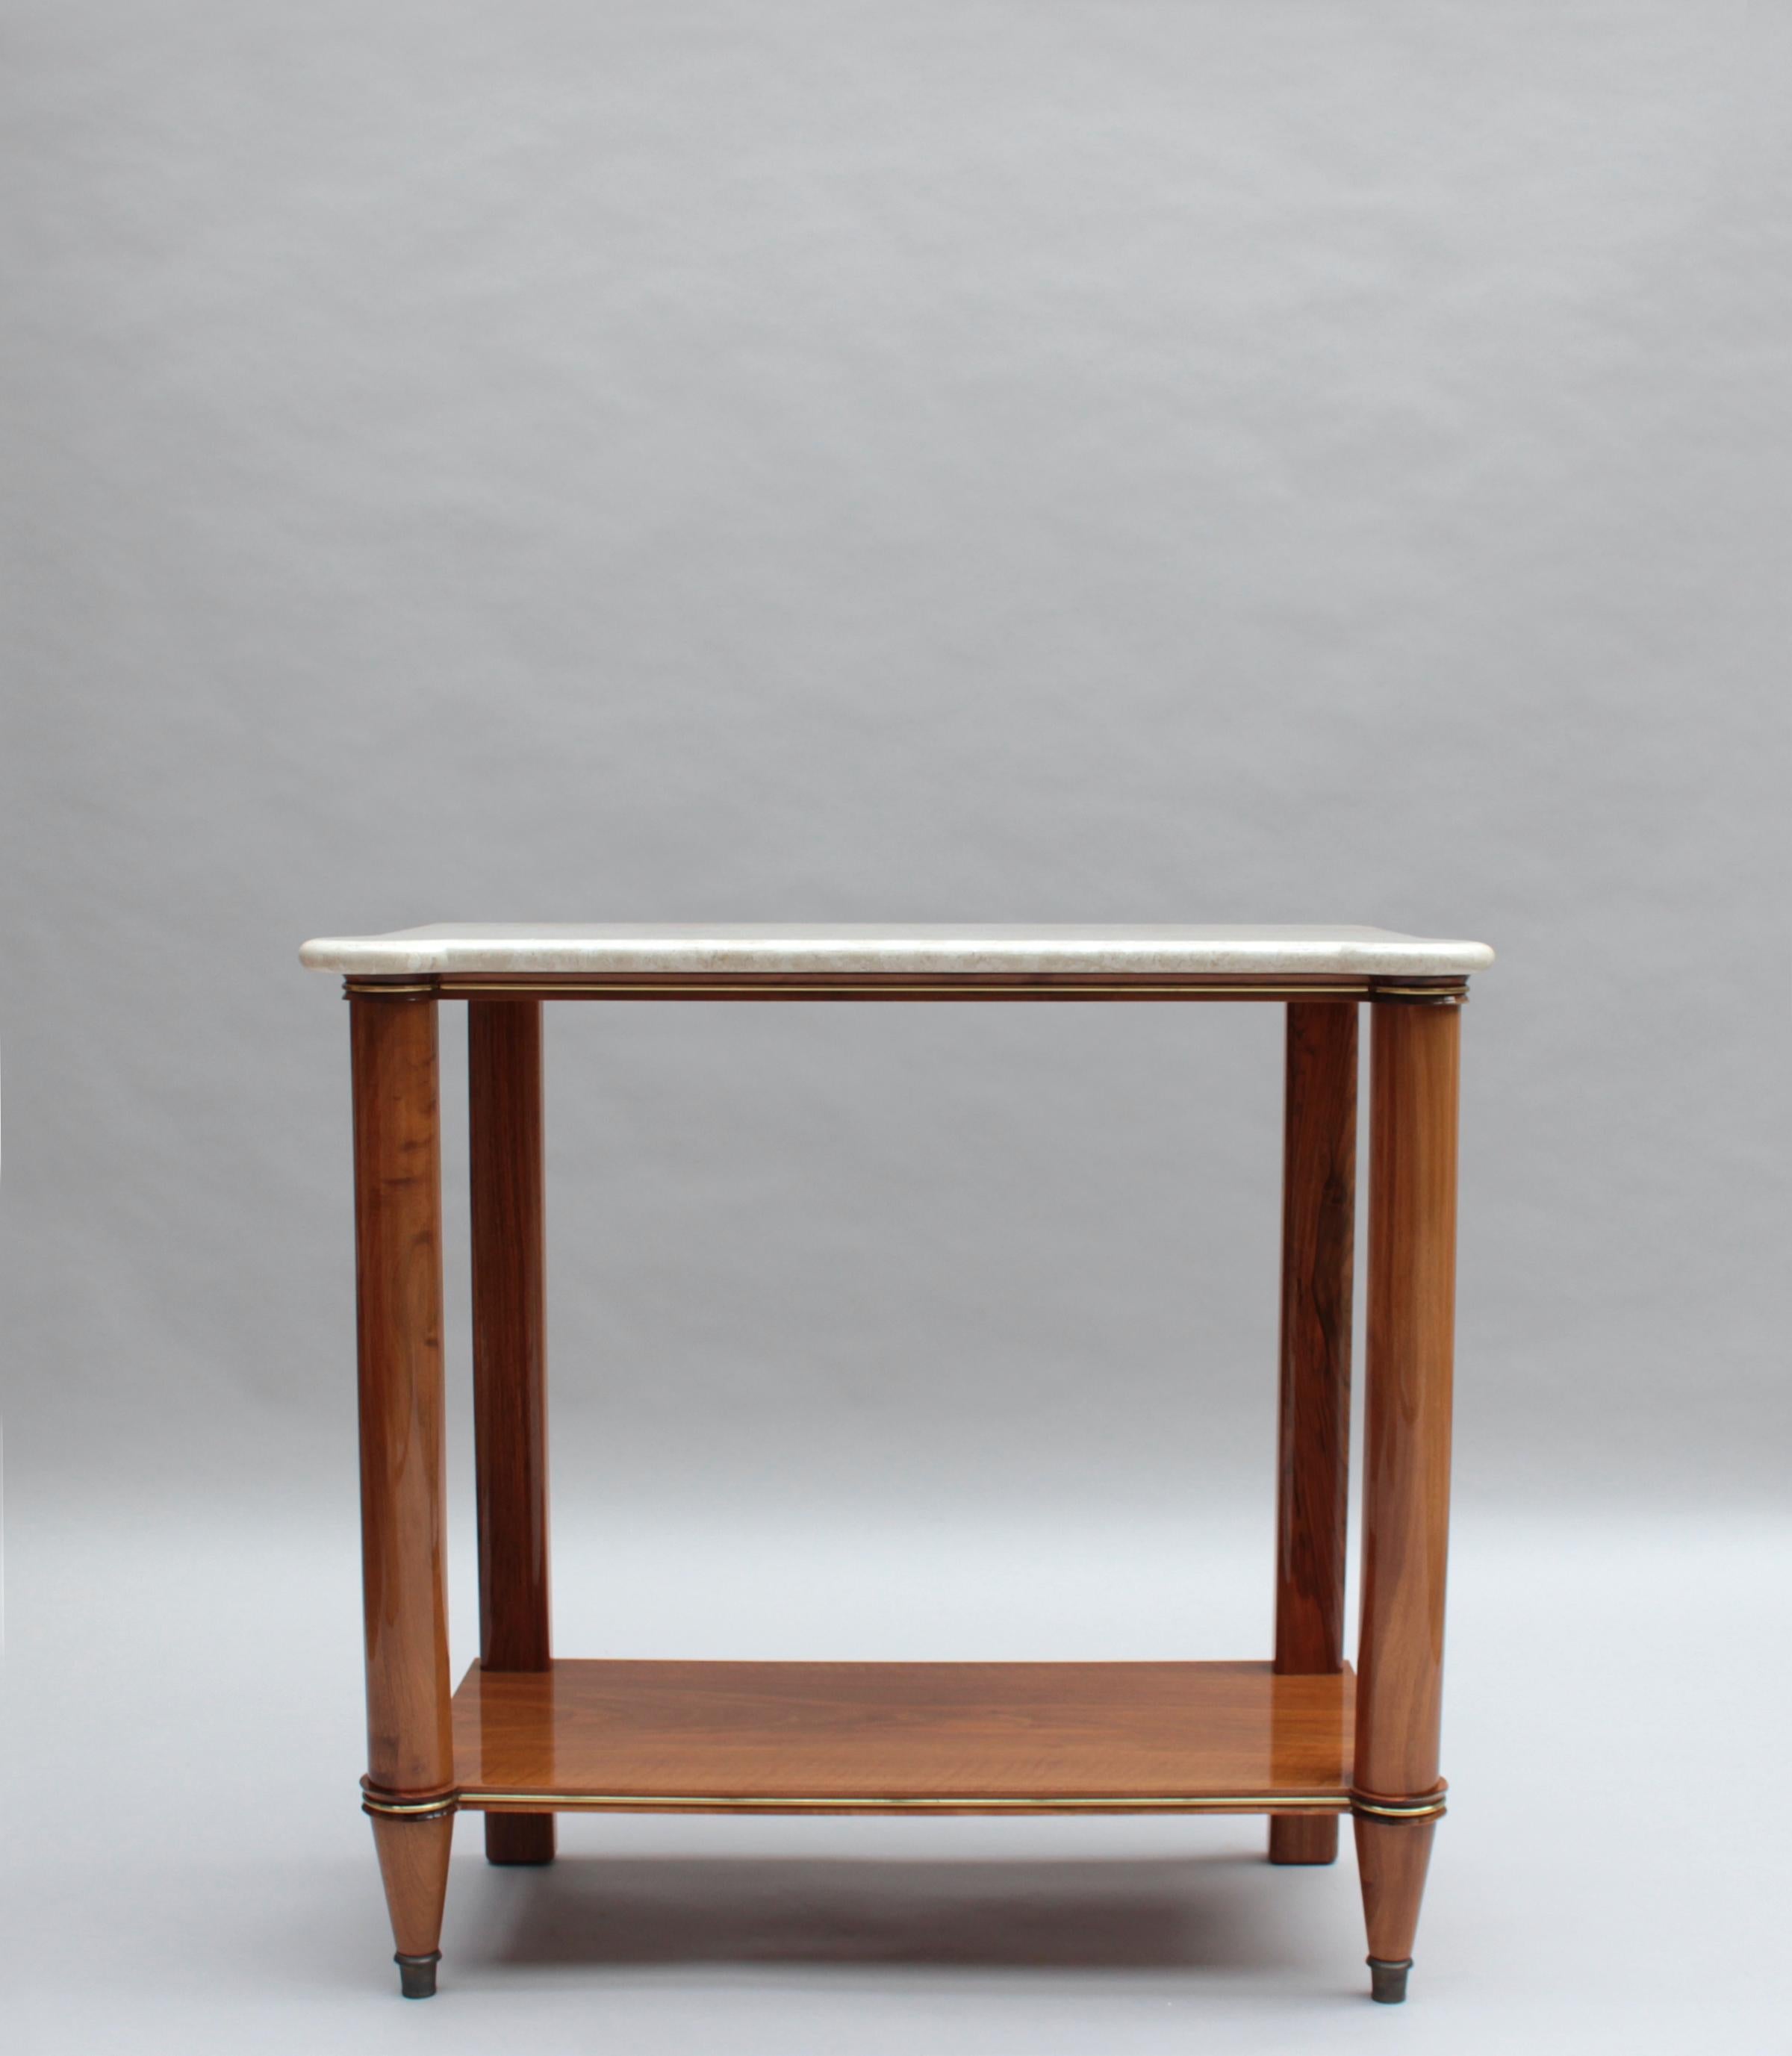 A fine French Mid-Century two-tiered walnut console with a marble top and brass details.
Given the wood underneath the marble is finished and shows some visible cut dowels suggests that the console might have been a three-tiered shelving unit